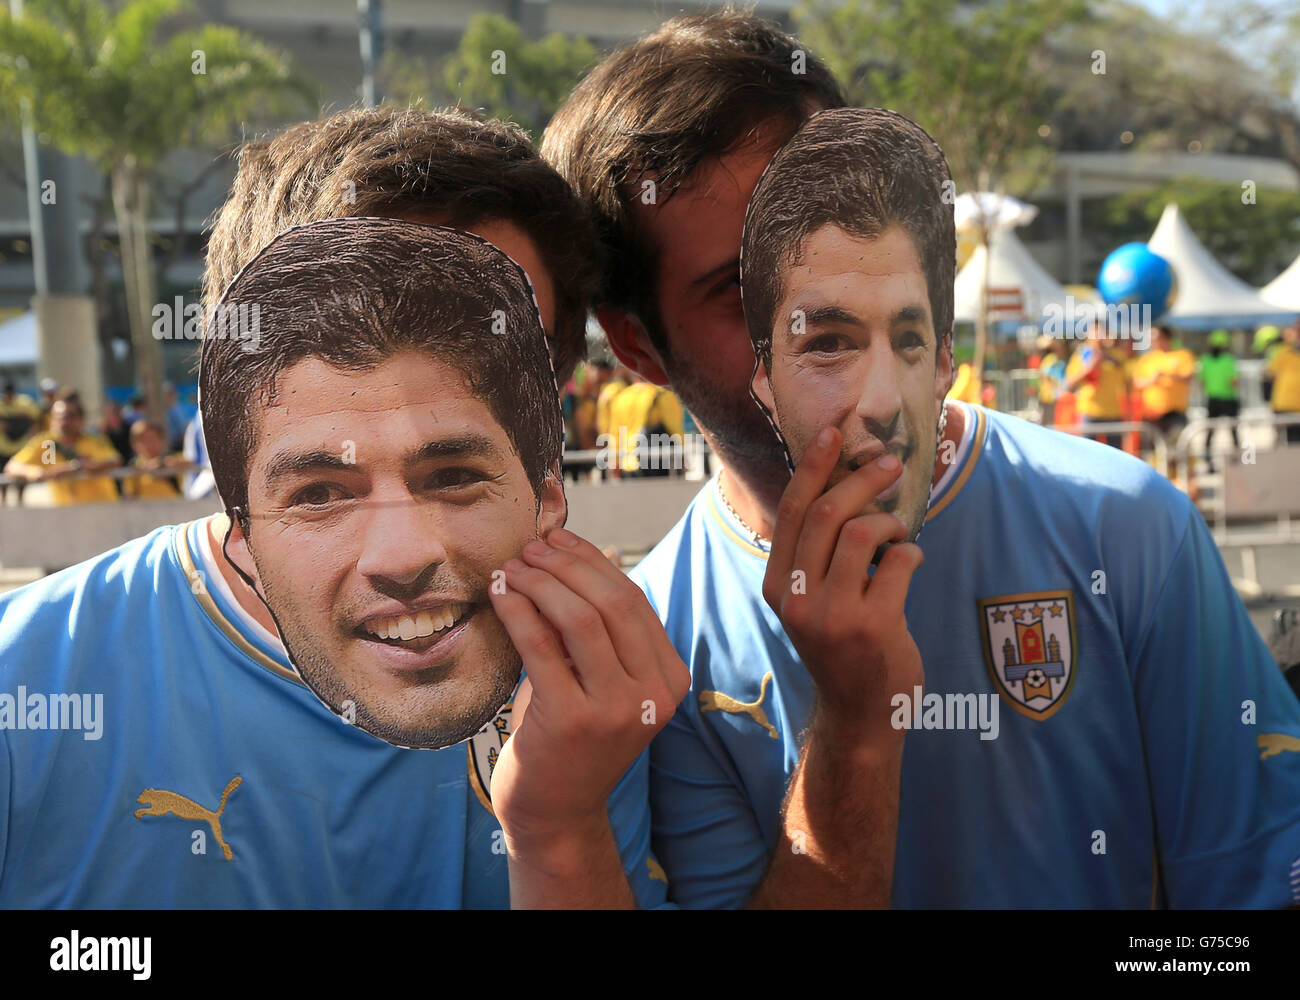 Uruguay fans show their support for Luis Suarez outside the ground before the FIFA World Cup, Round of 16 match at the Estadio do Maracana, Rio de Janeiro, Brazil. PRESS ASSOCIATION Photo. Picture date: Saturday June 28, 2014. Photo credit should read: Mike Egerton/PA Wire. RESTRICTIONS: Editorial use only. No commercial use. No use with any unofficial 3rd party logos. No manipulation of images. No video emulation Stock Photo